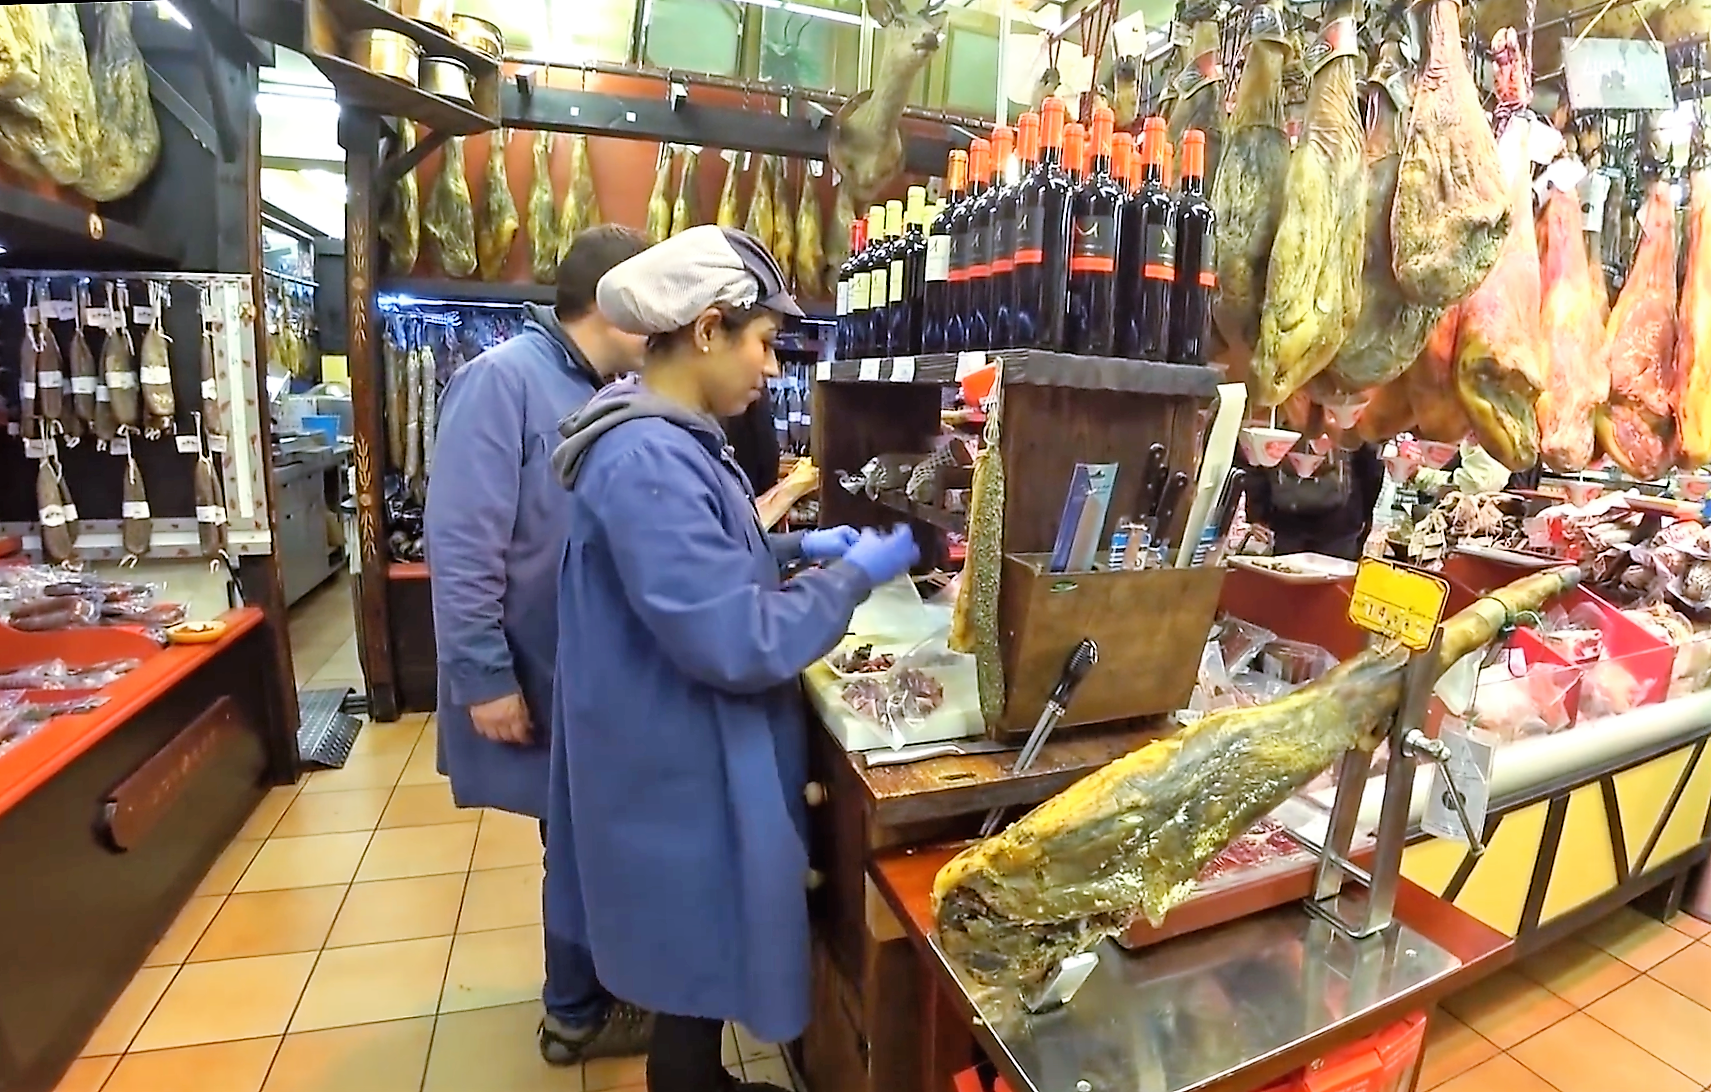 Food sellers in a meat market with big pieces of ham hanging